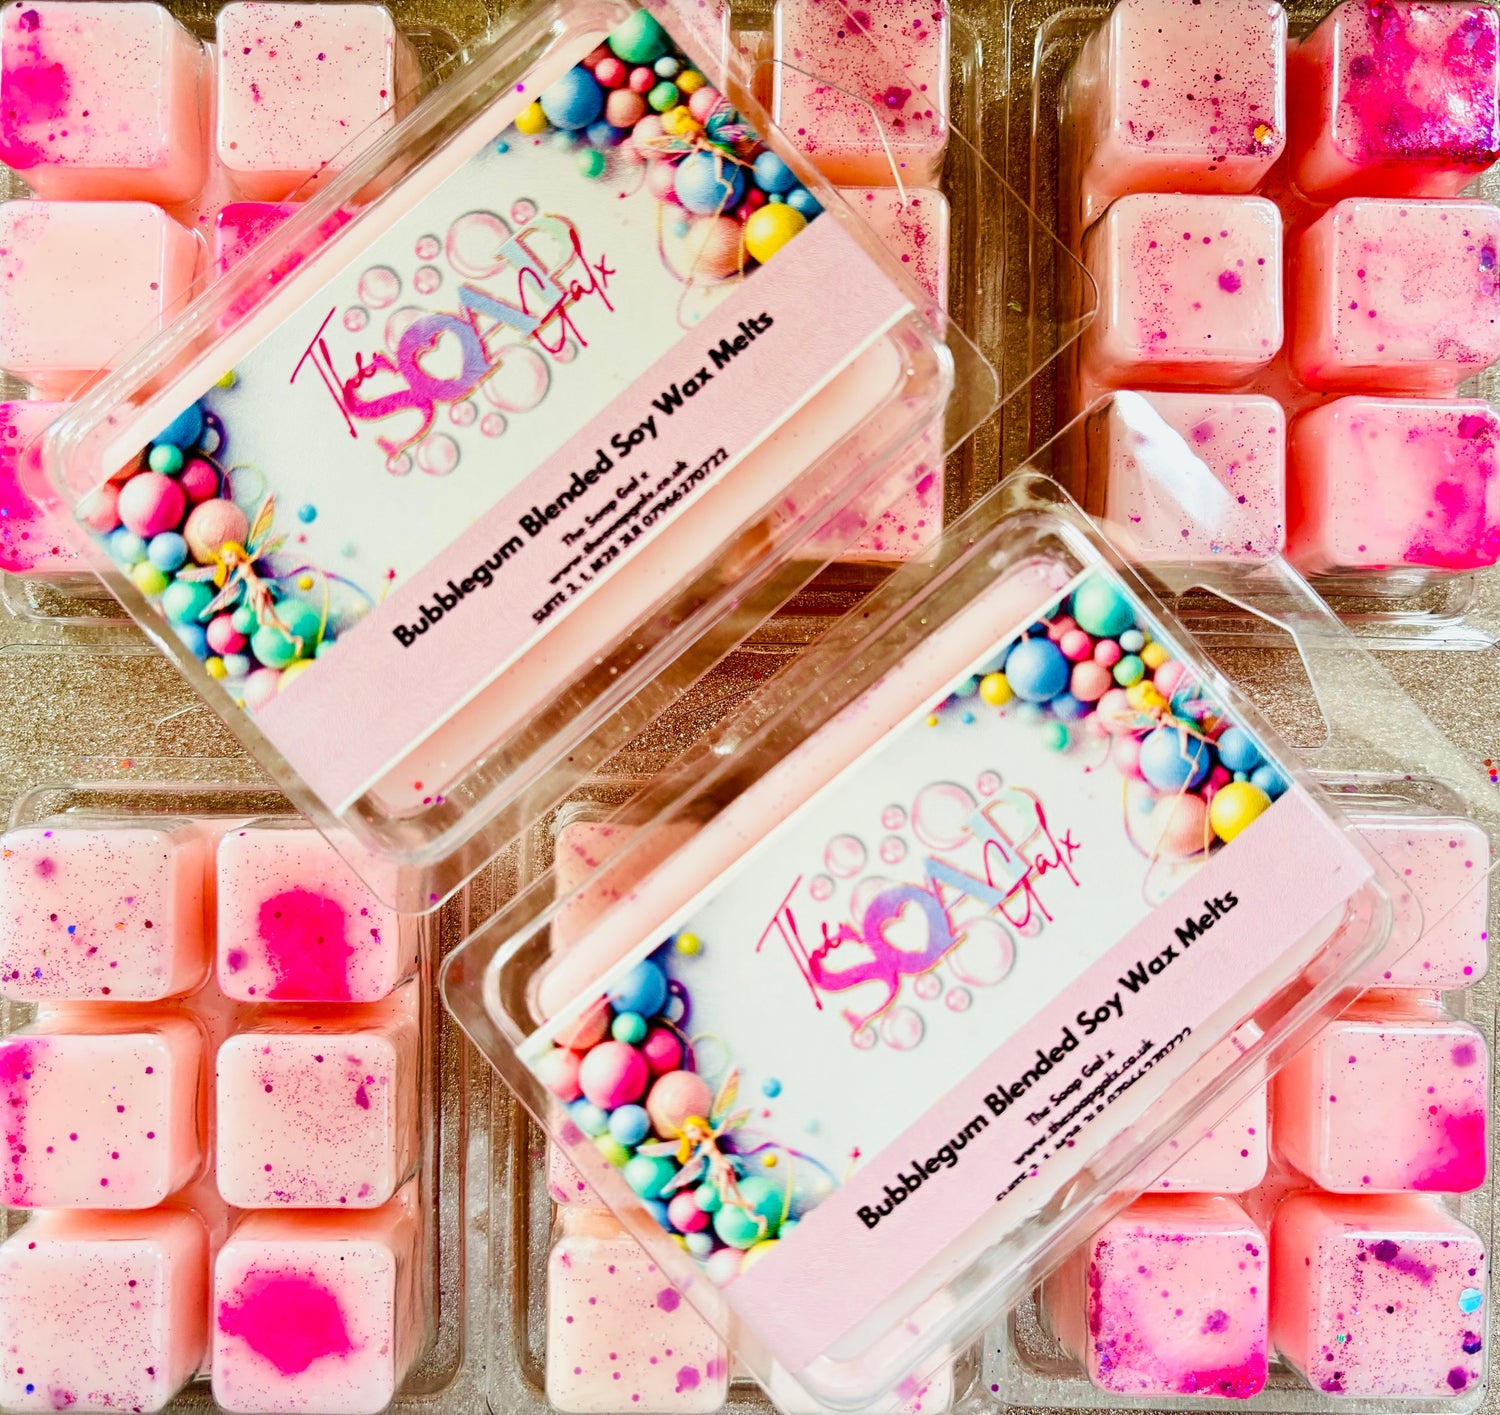 Colorful Bubba Hubba Bubblegum Wax Melts by The Soap Gals in packaging with a vibrant, speckled design.